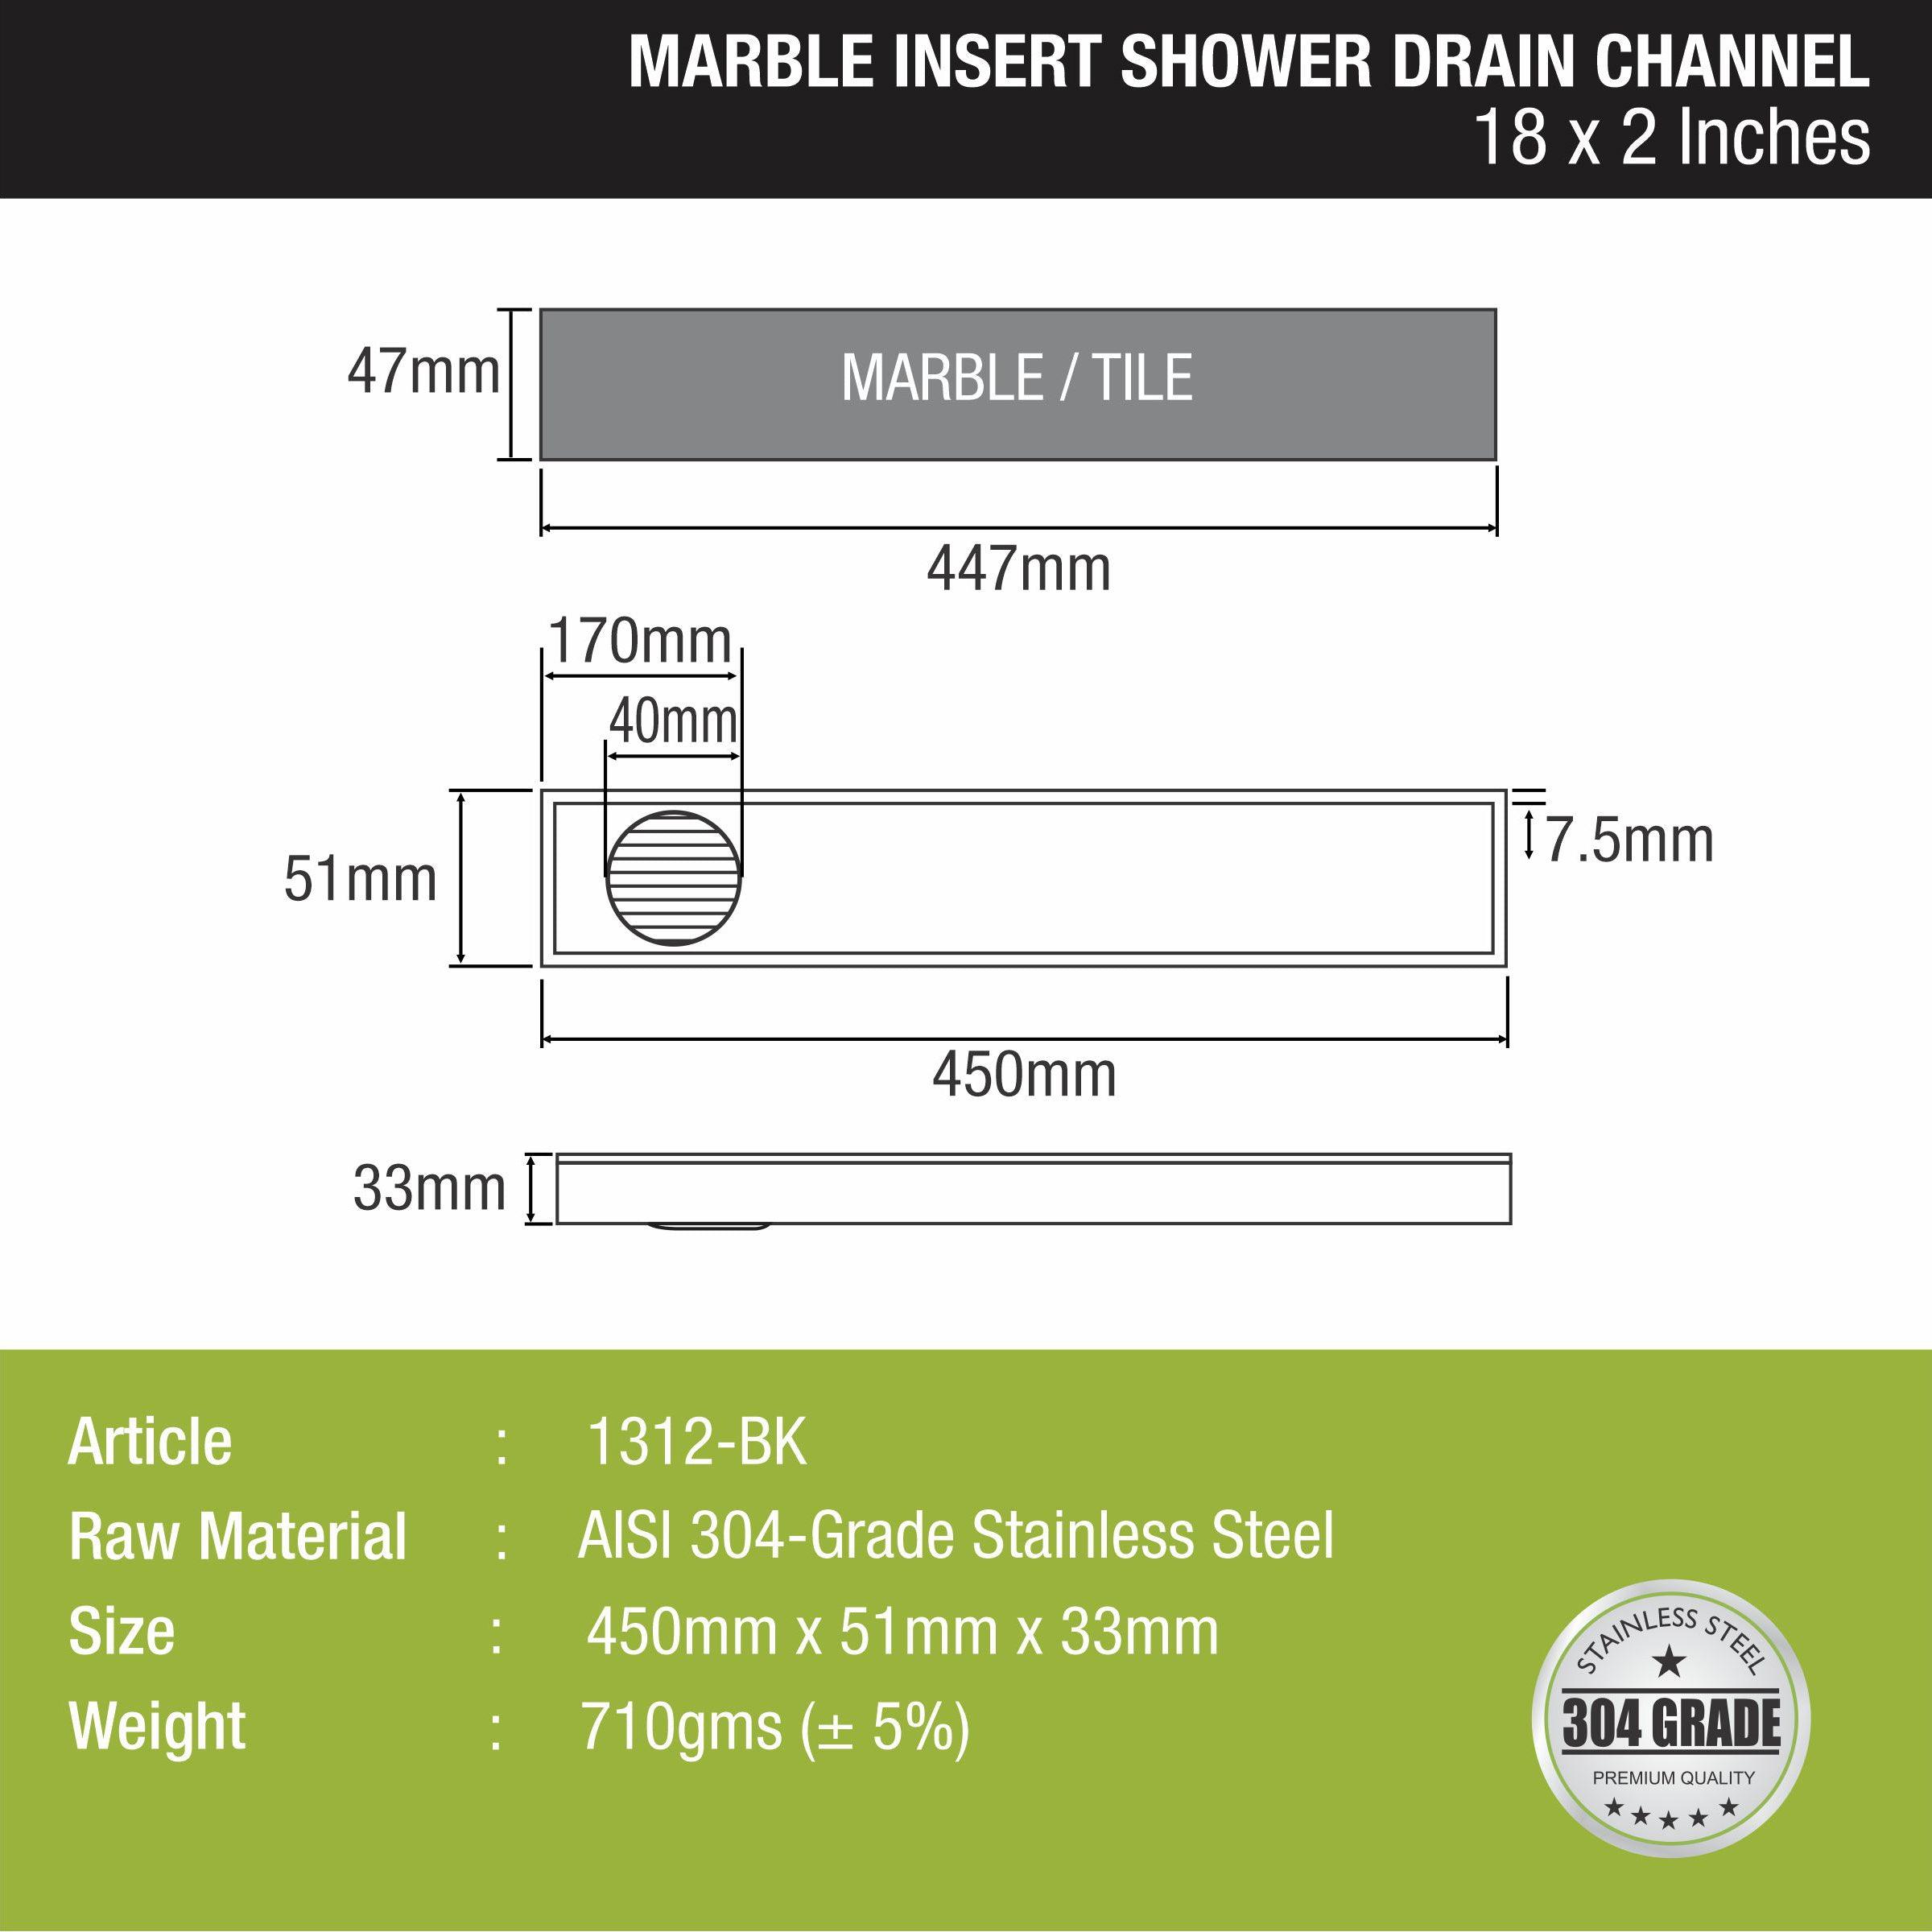 Marble Insert Shower Drain Channel - Black (18 x 2 Inches) size and measurement